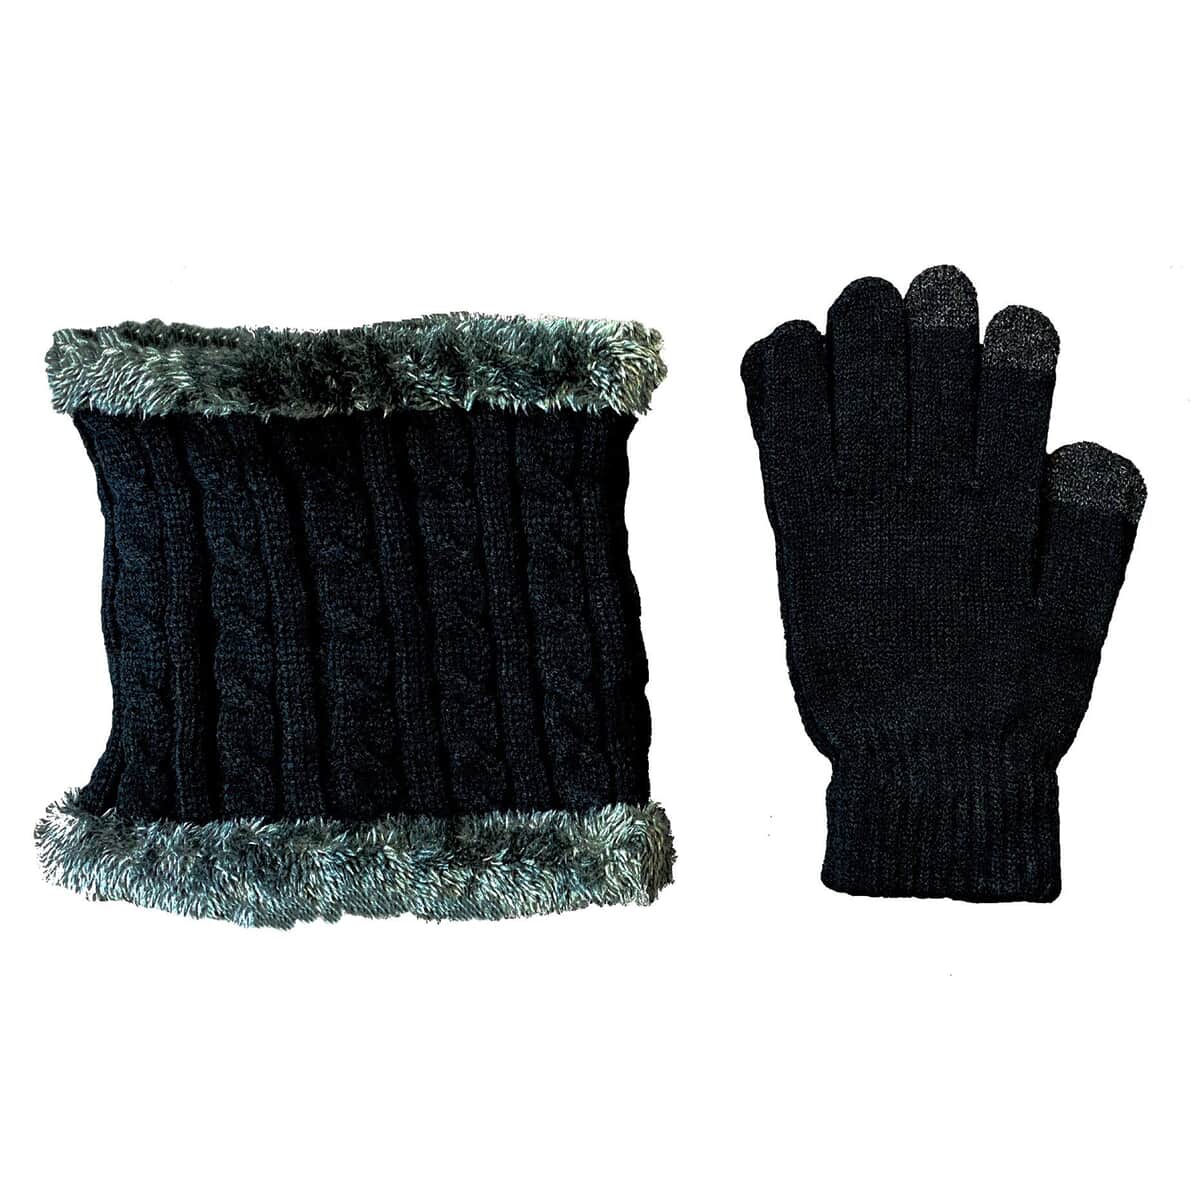 Black and Gray Acrylic Winter Knit Scarf & Gloves Set (11"x1"x15") image number 0